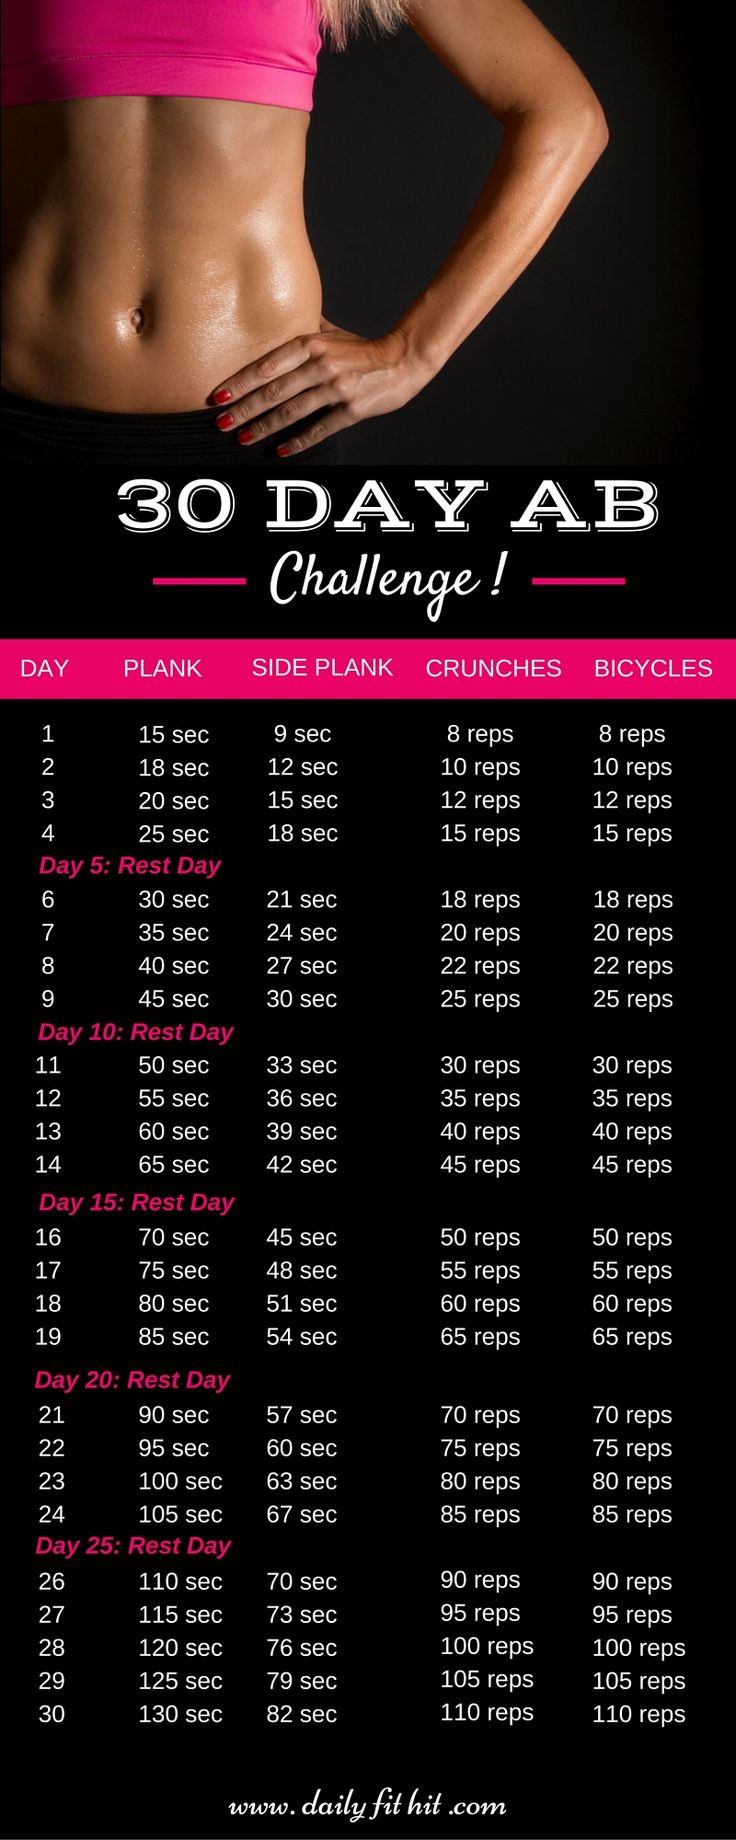 18 30 Day Ab Challenges That Will Help Build Your Six Pack Like Crazy 